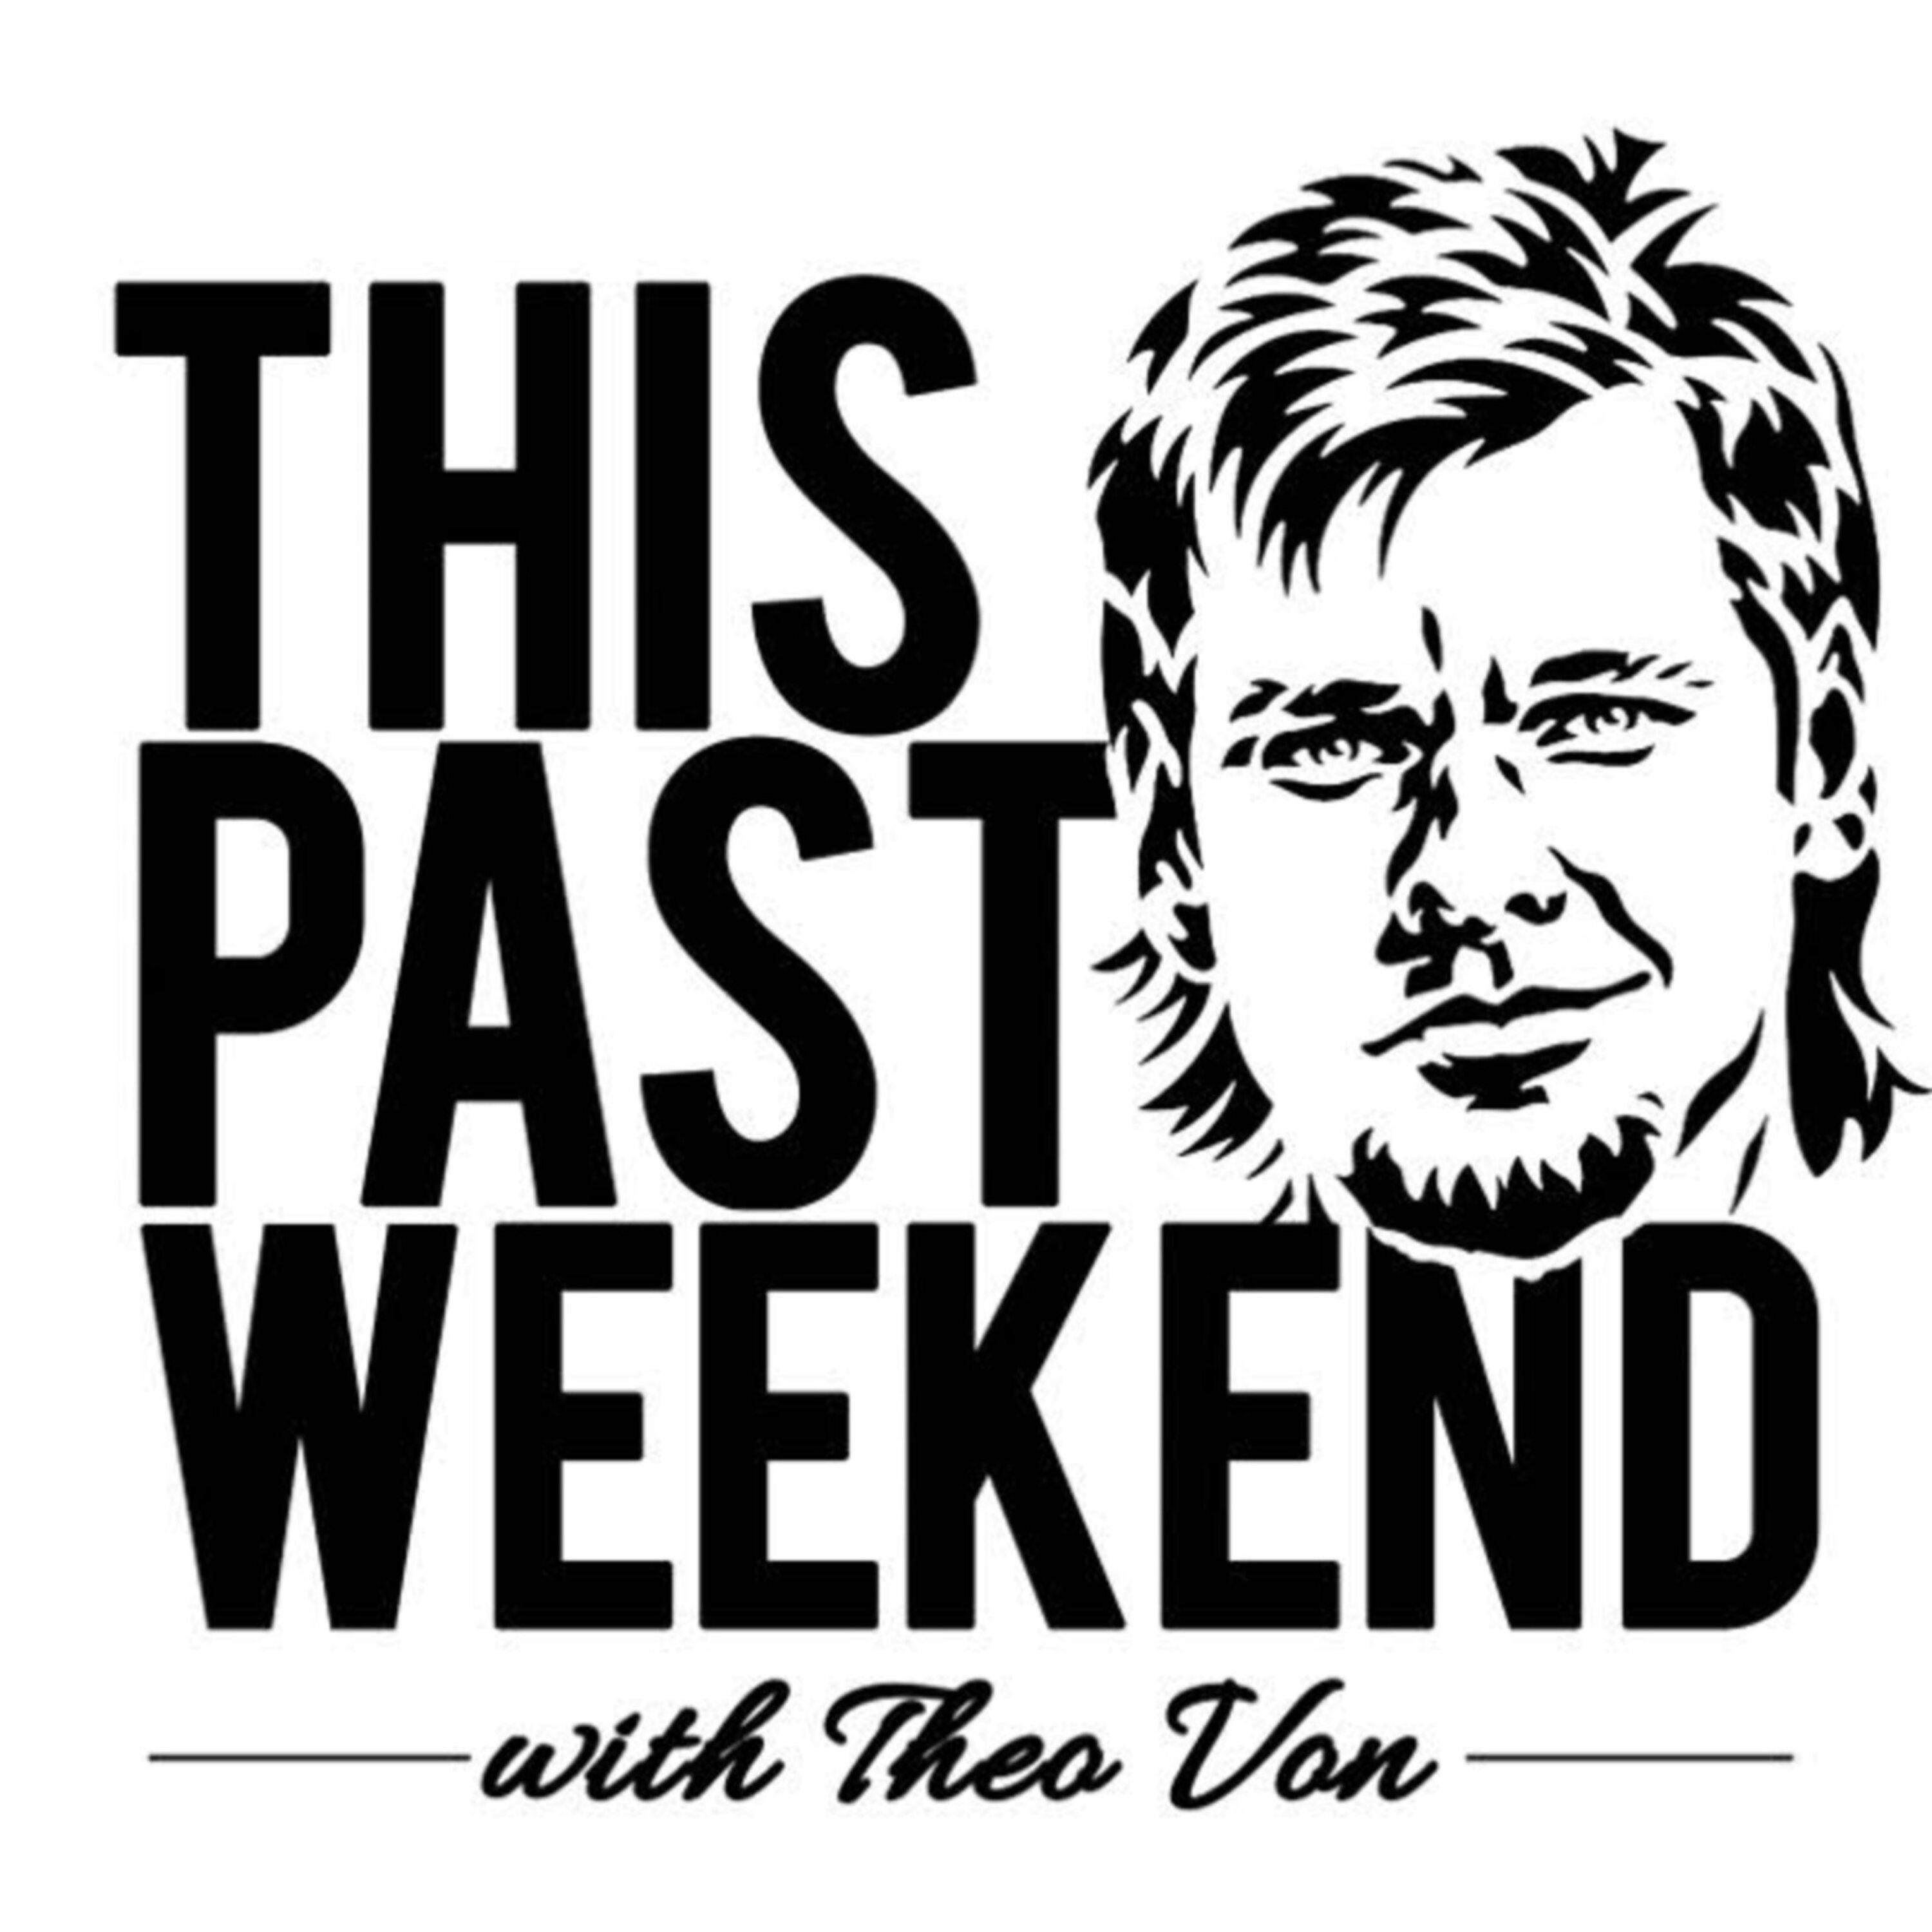 Gianni Paolo | This Past Weekend #202 by Theo Von